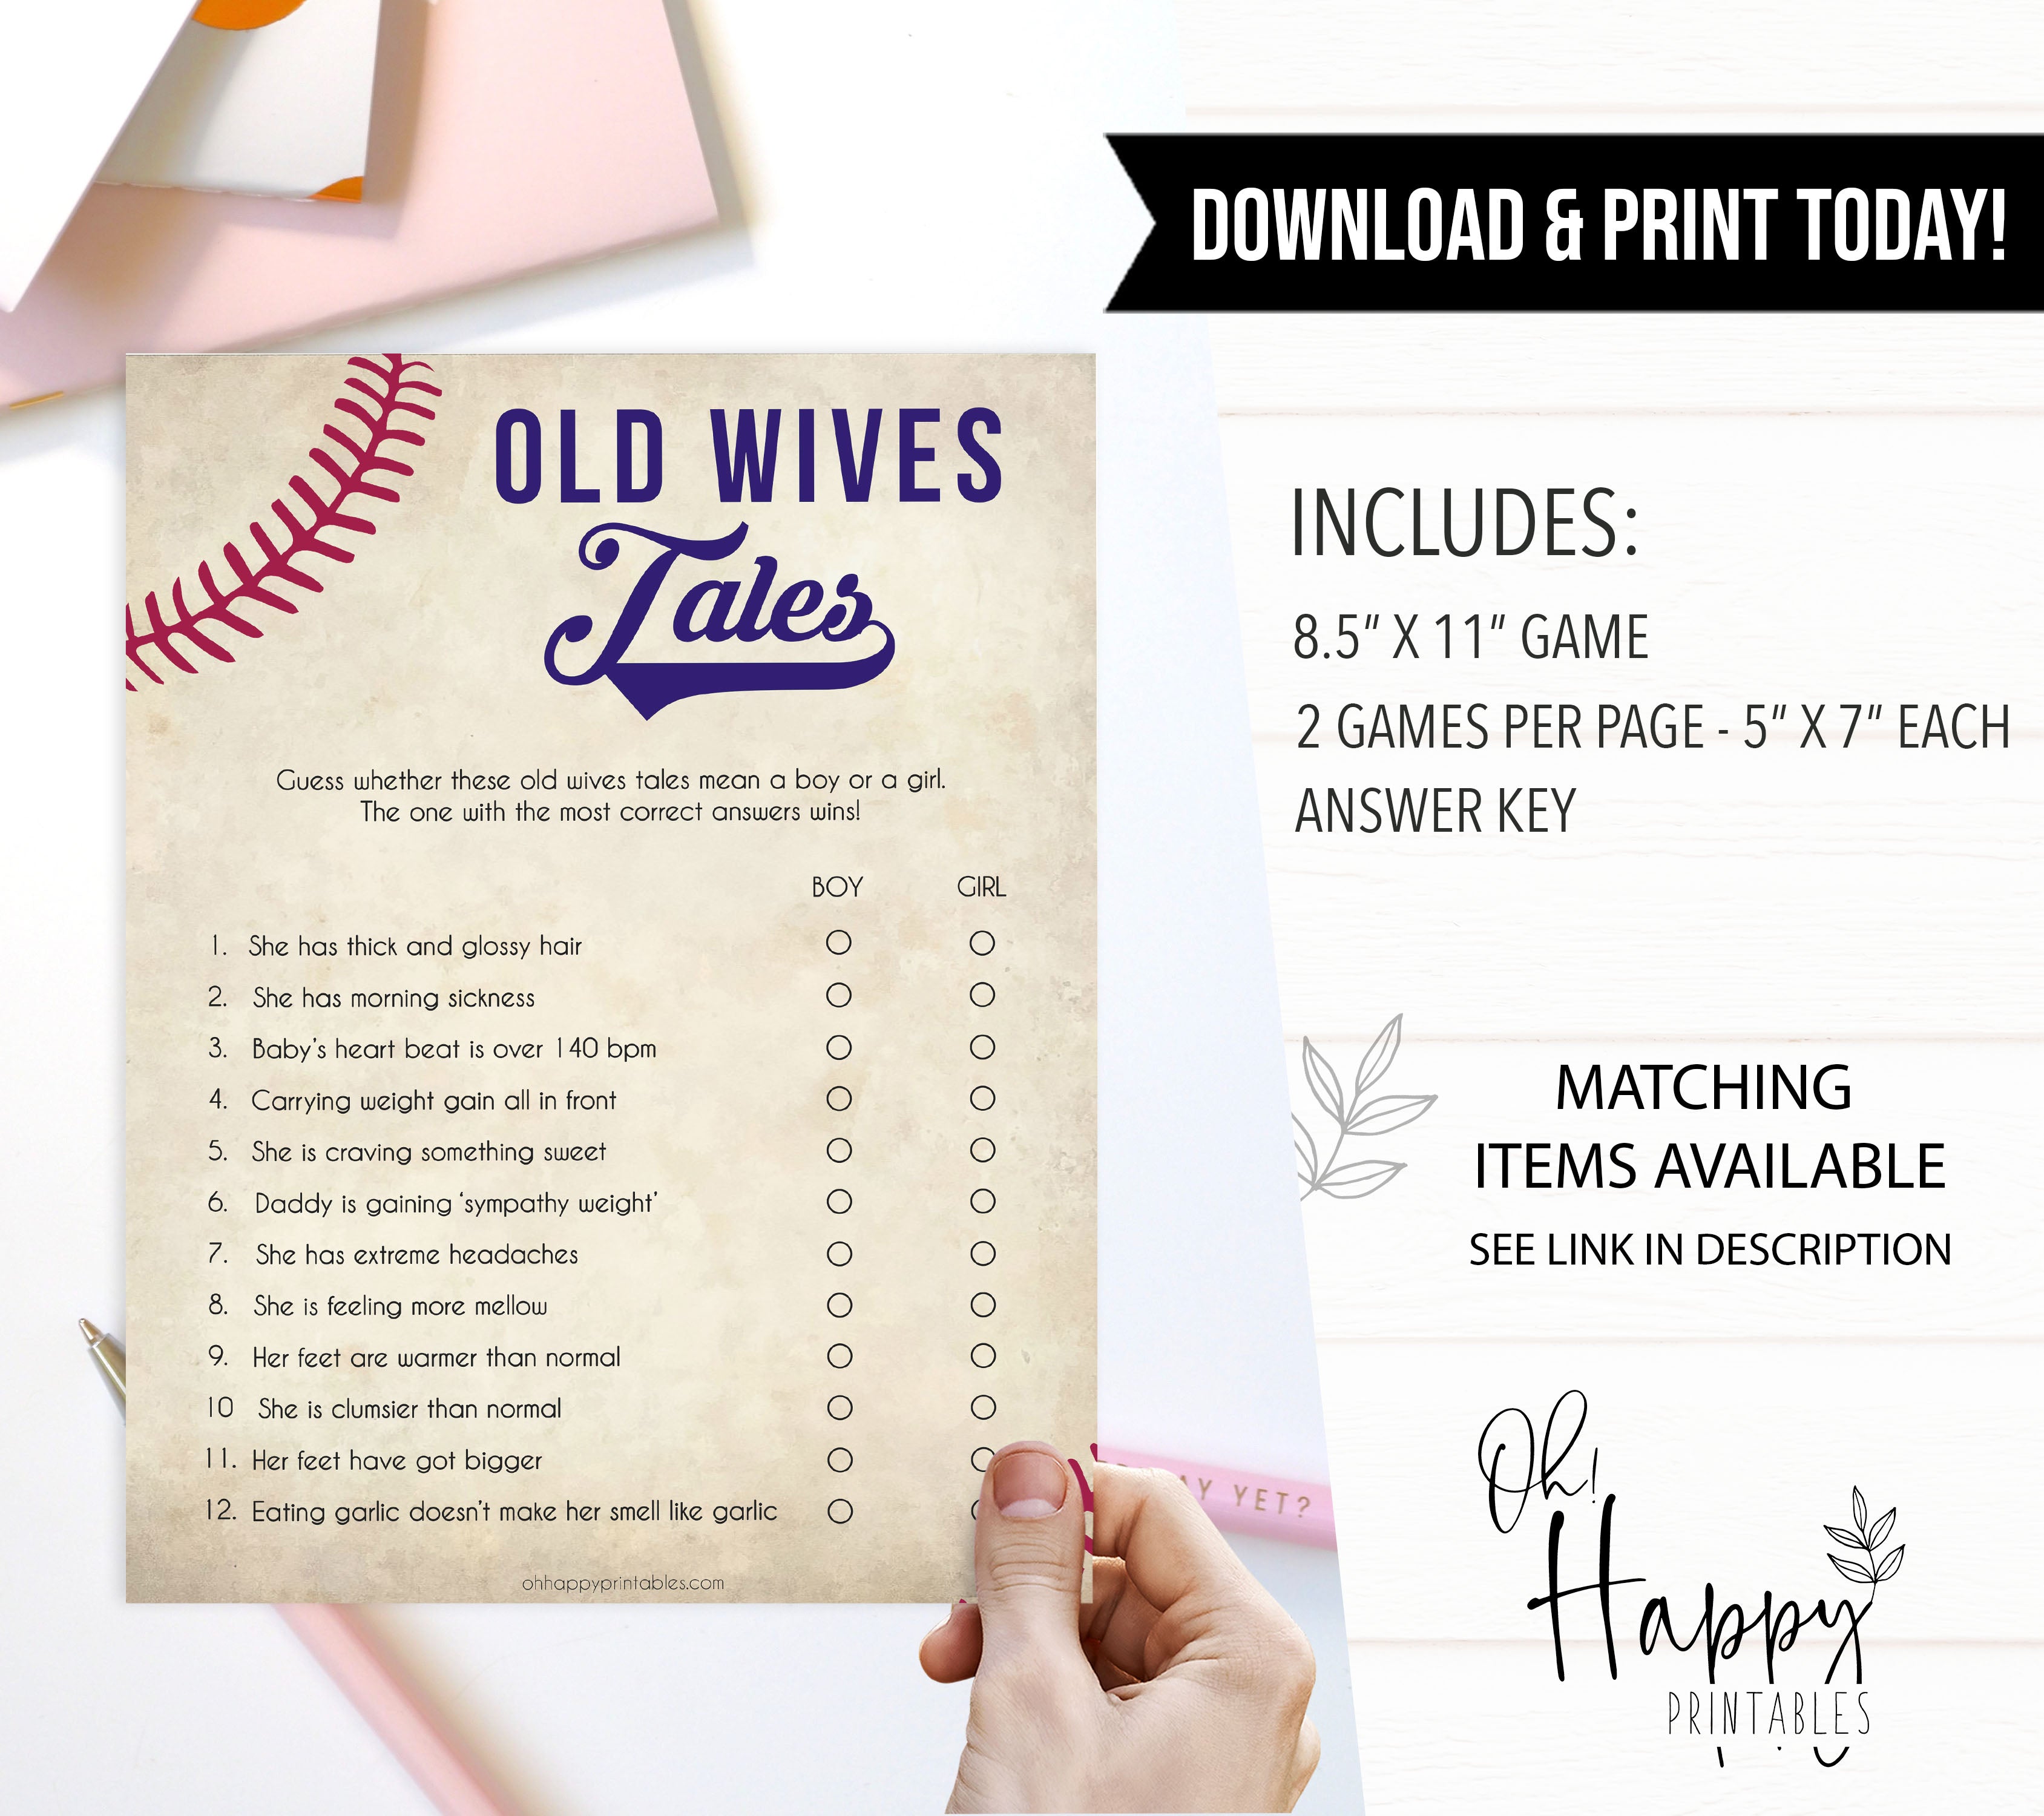 Old wives tales baby games, Baseball baby shower games, printable baby shower games, fun baby shower games, top baby shower ideas, little slugger baby games